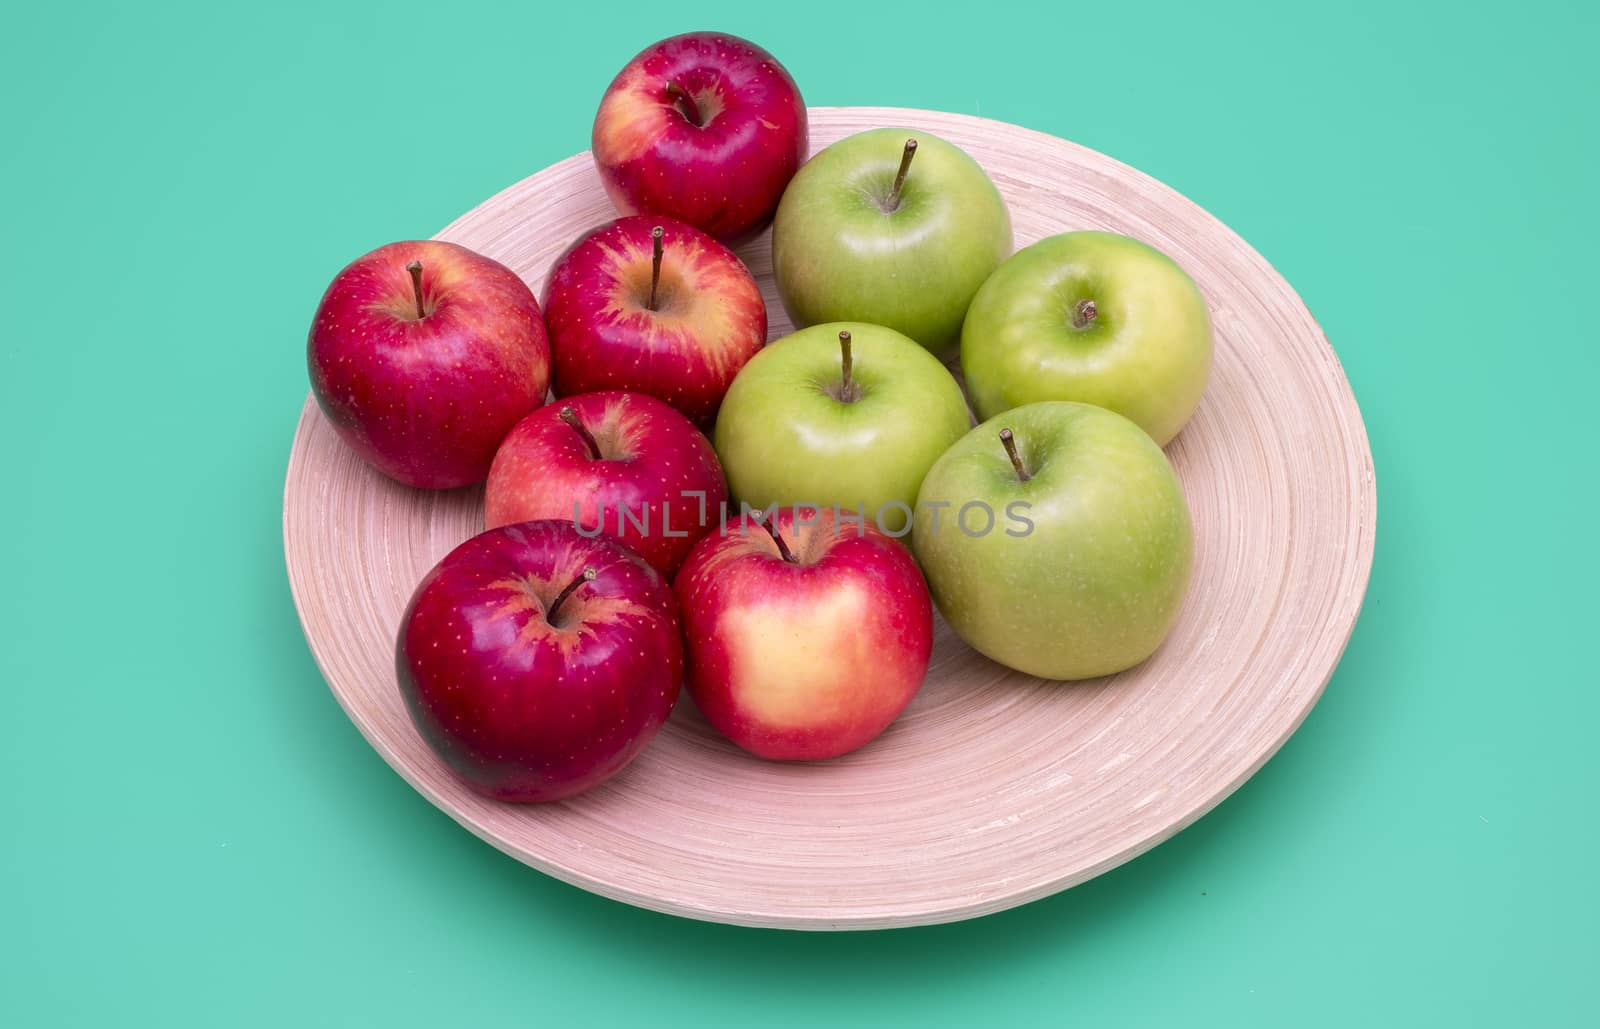 Red and green apples on a bamboo plate. Green background. Healthy eating concepts.